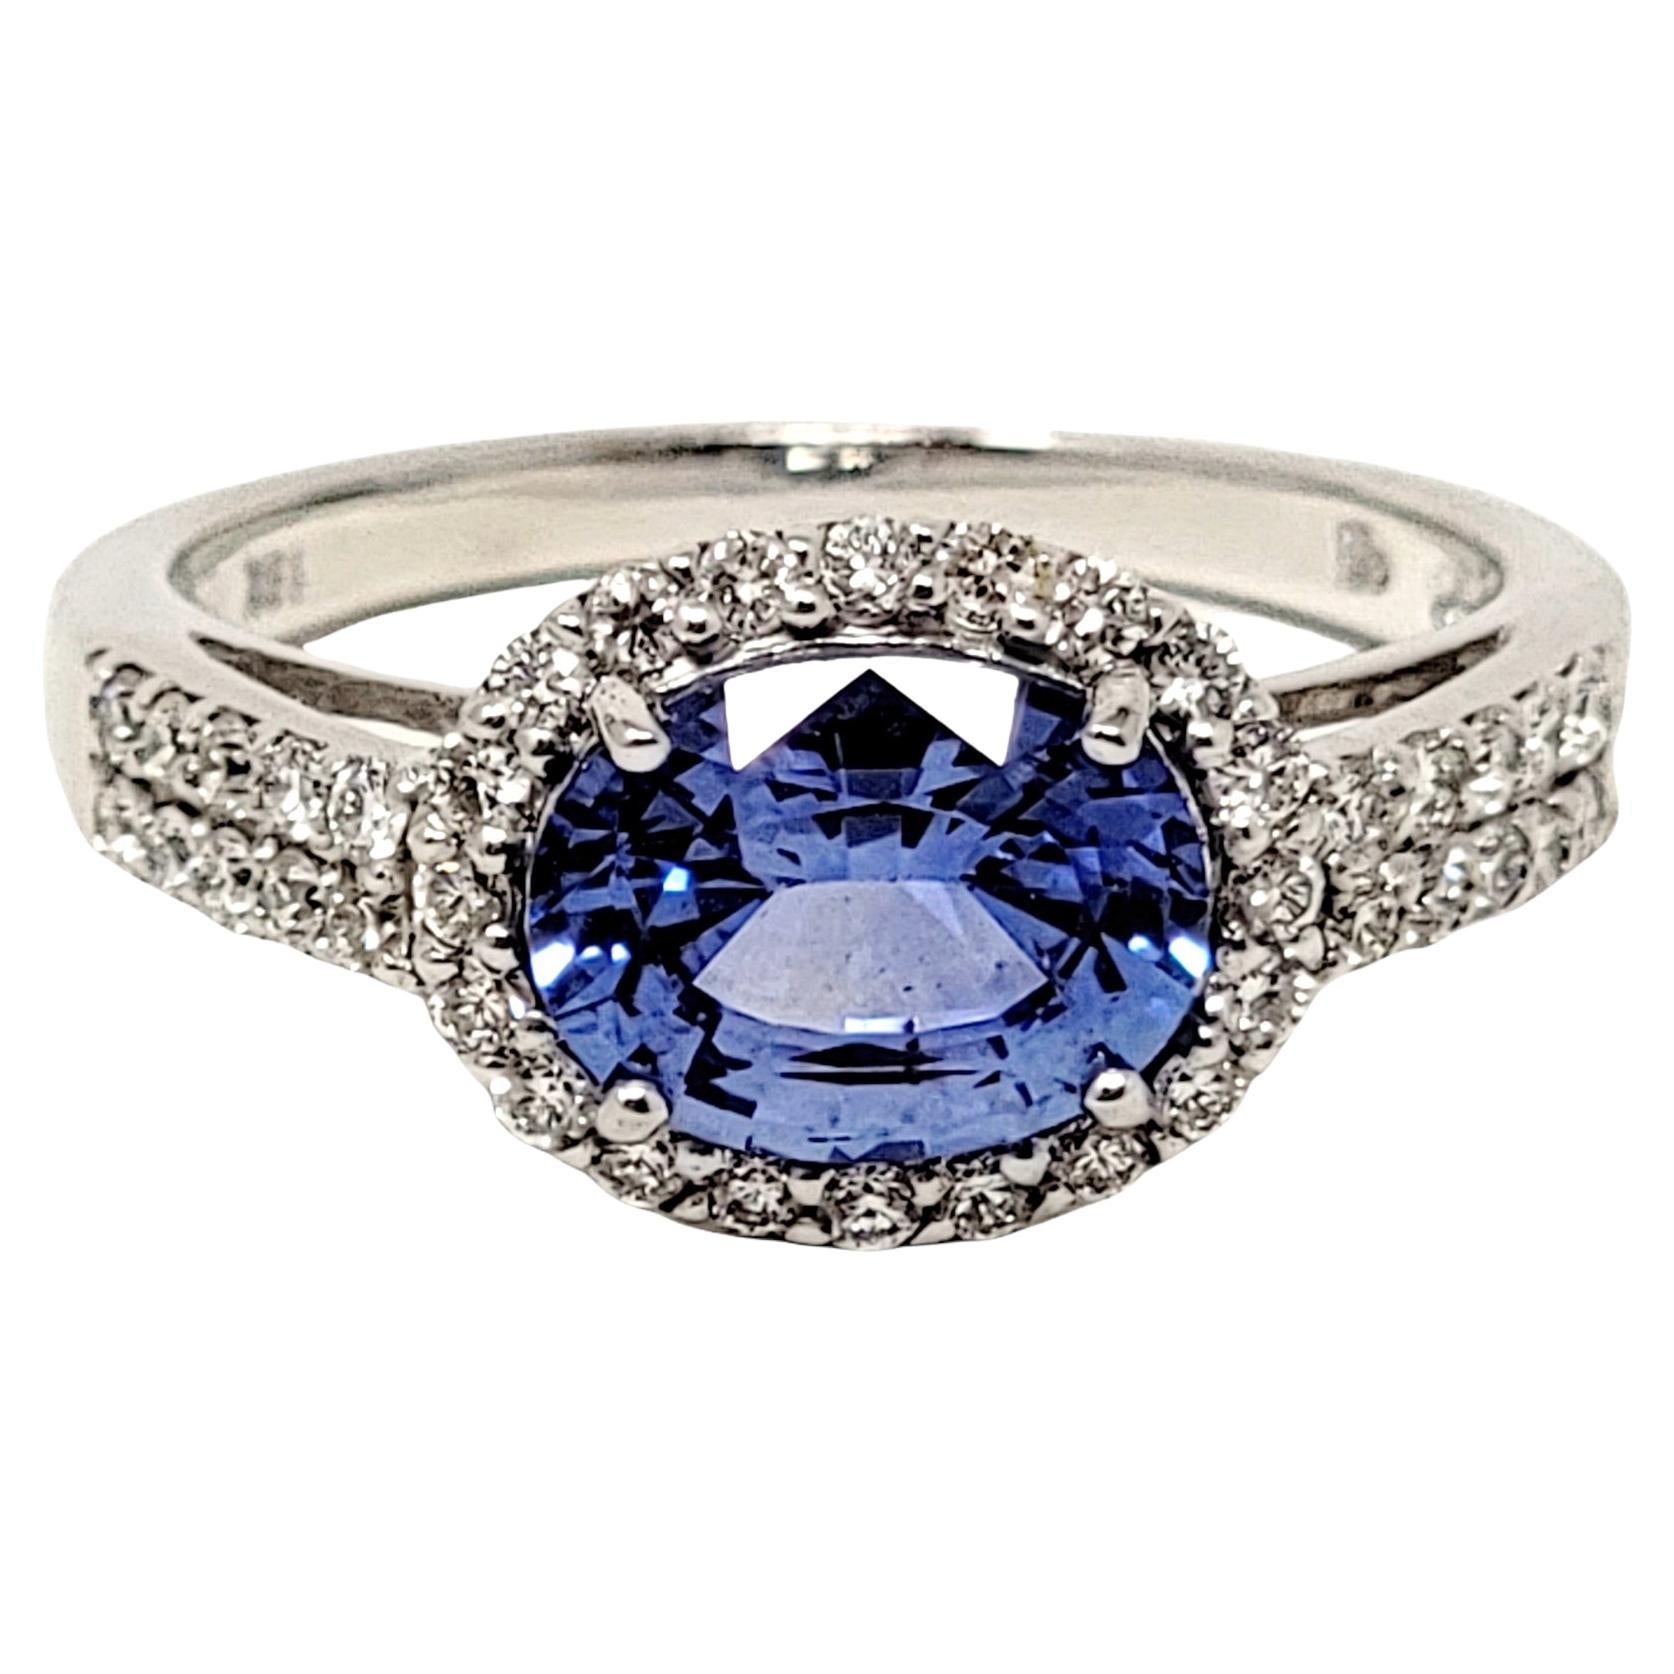 2.02 Carat Total Oval Ceylon Sapphire and Diamond Band Ring 18 Karat White Gold For Sale